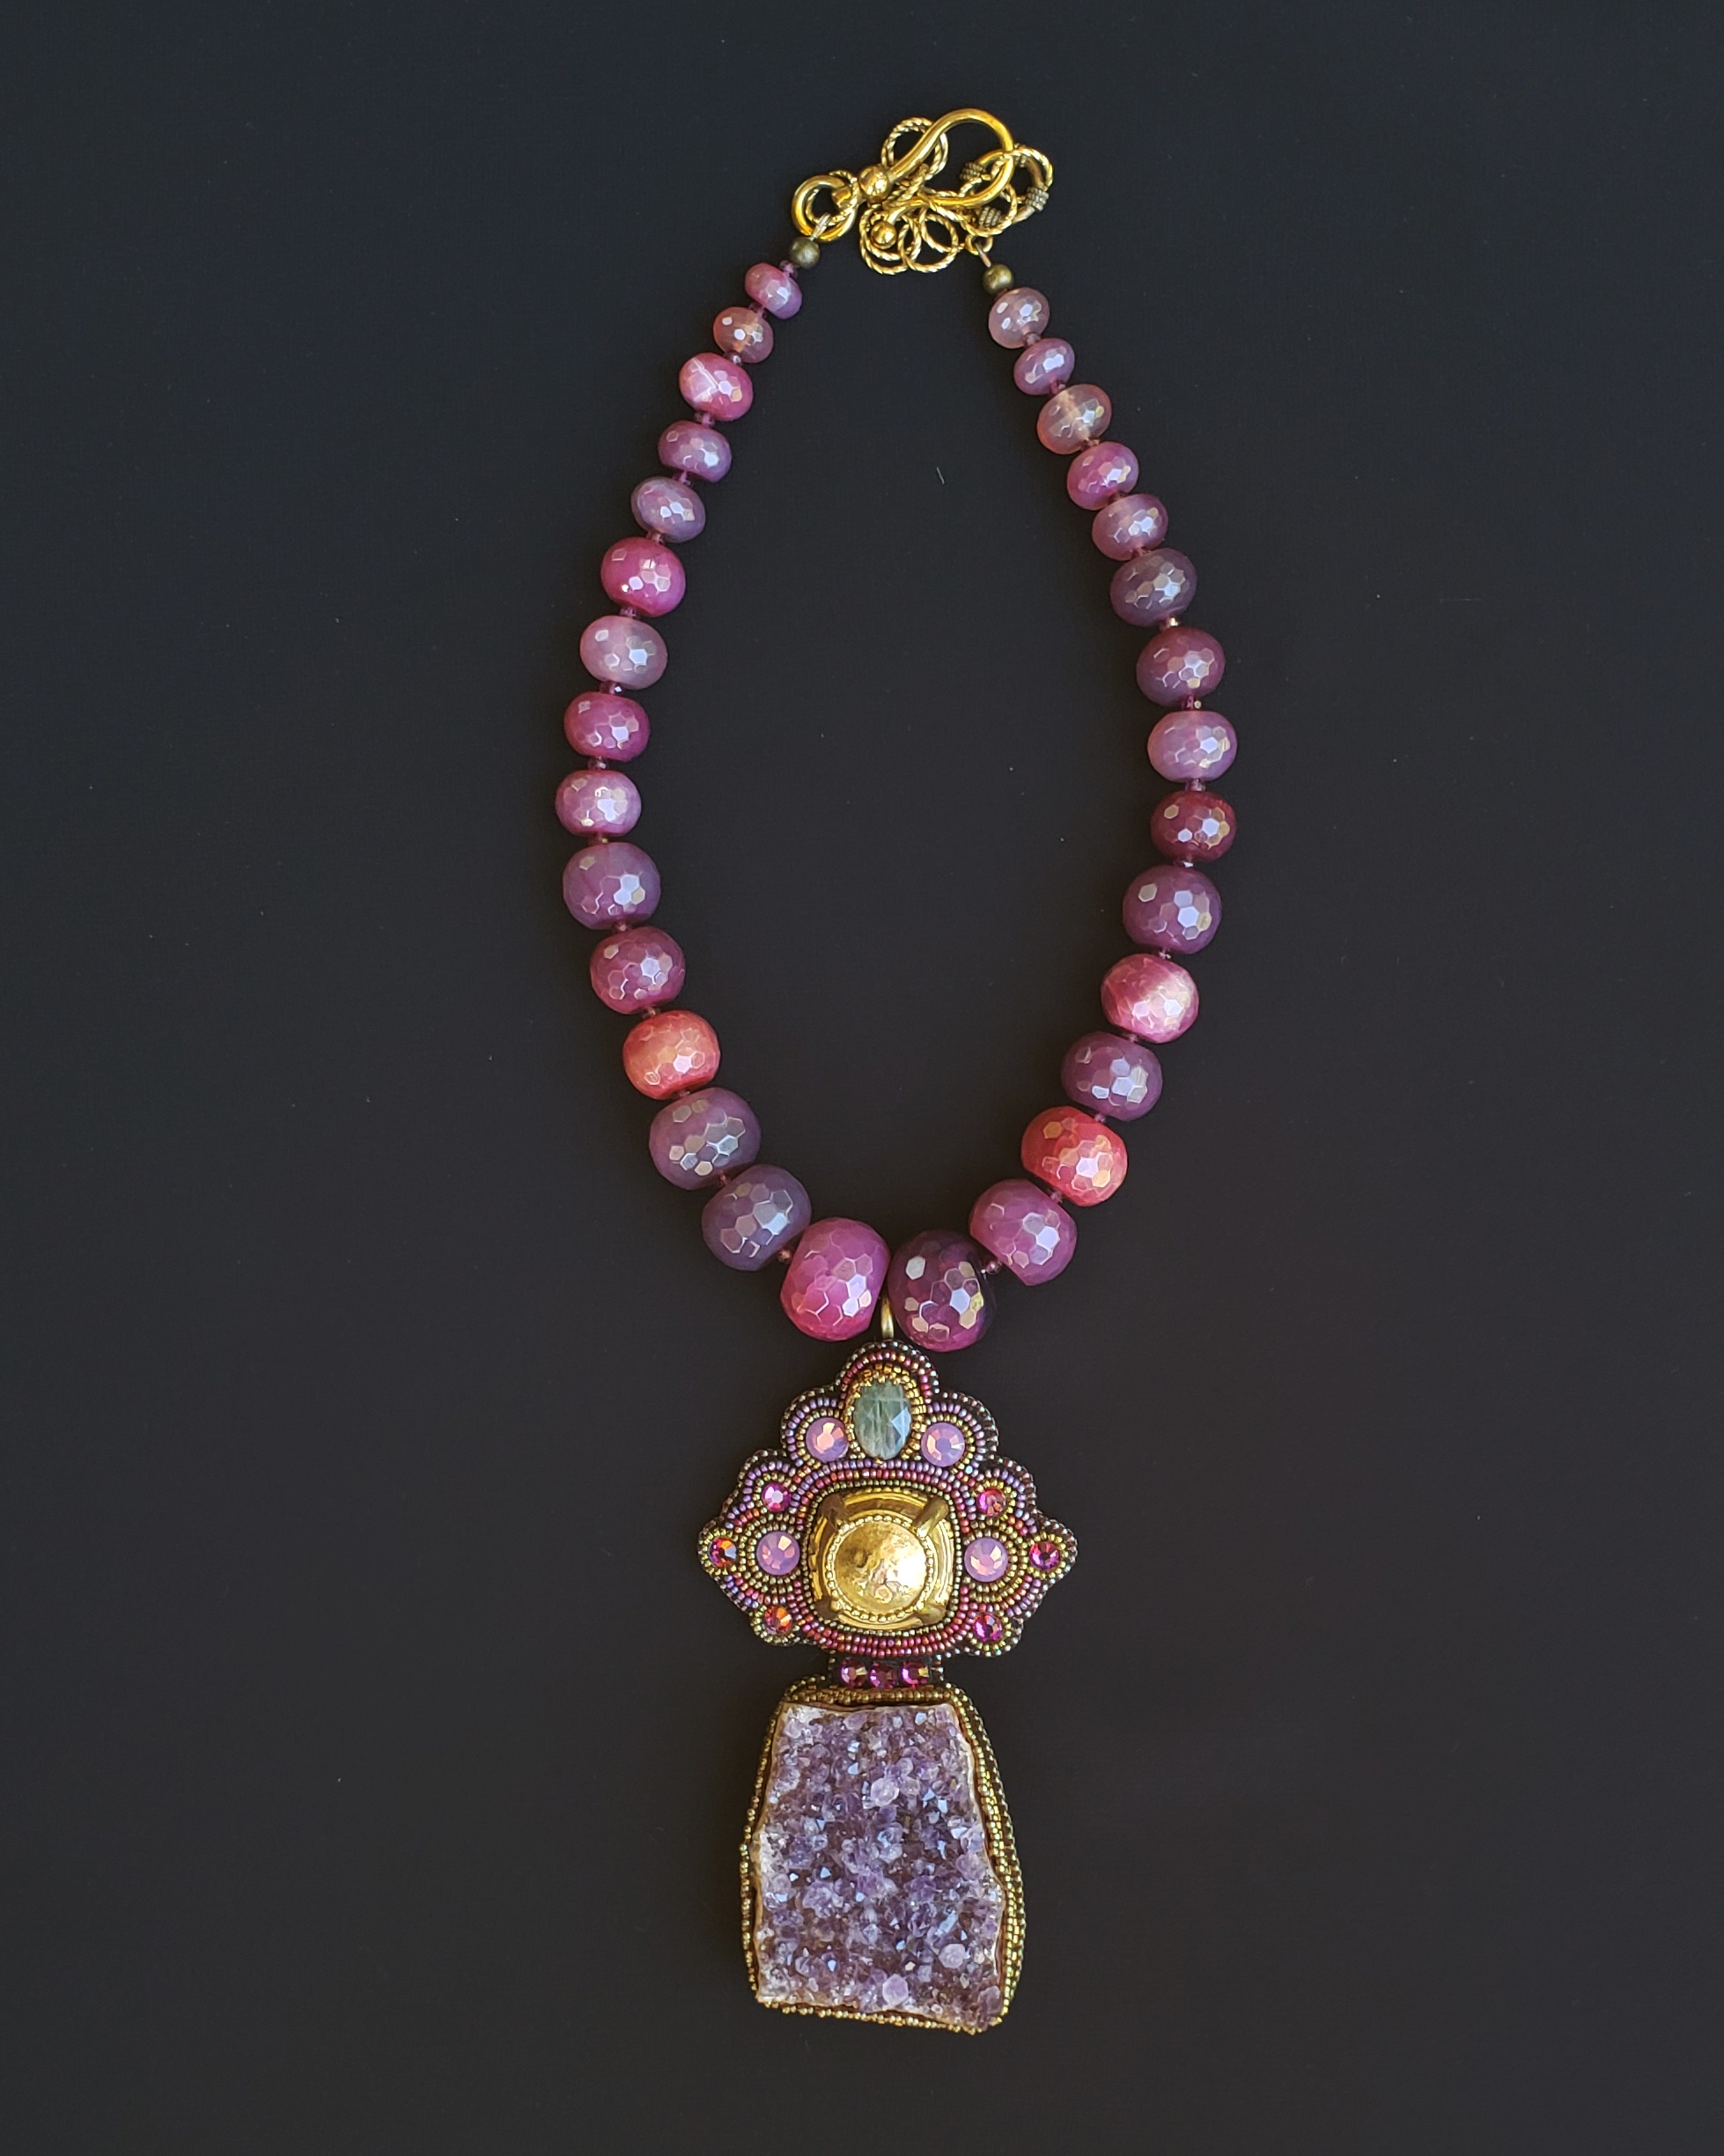 Pink Agate Beads & Amethyst Geode Slice Necklace